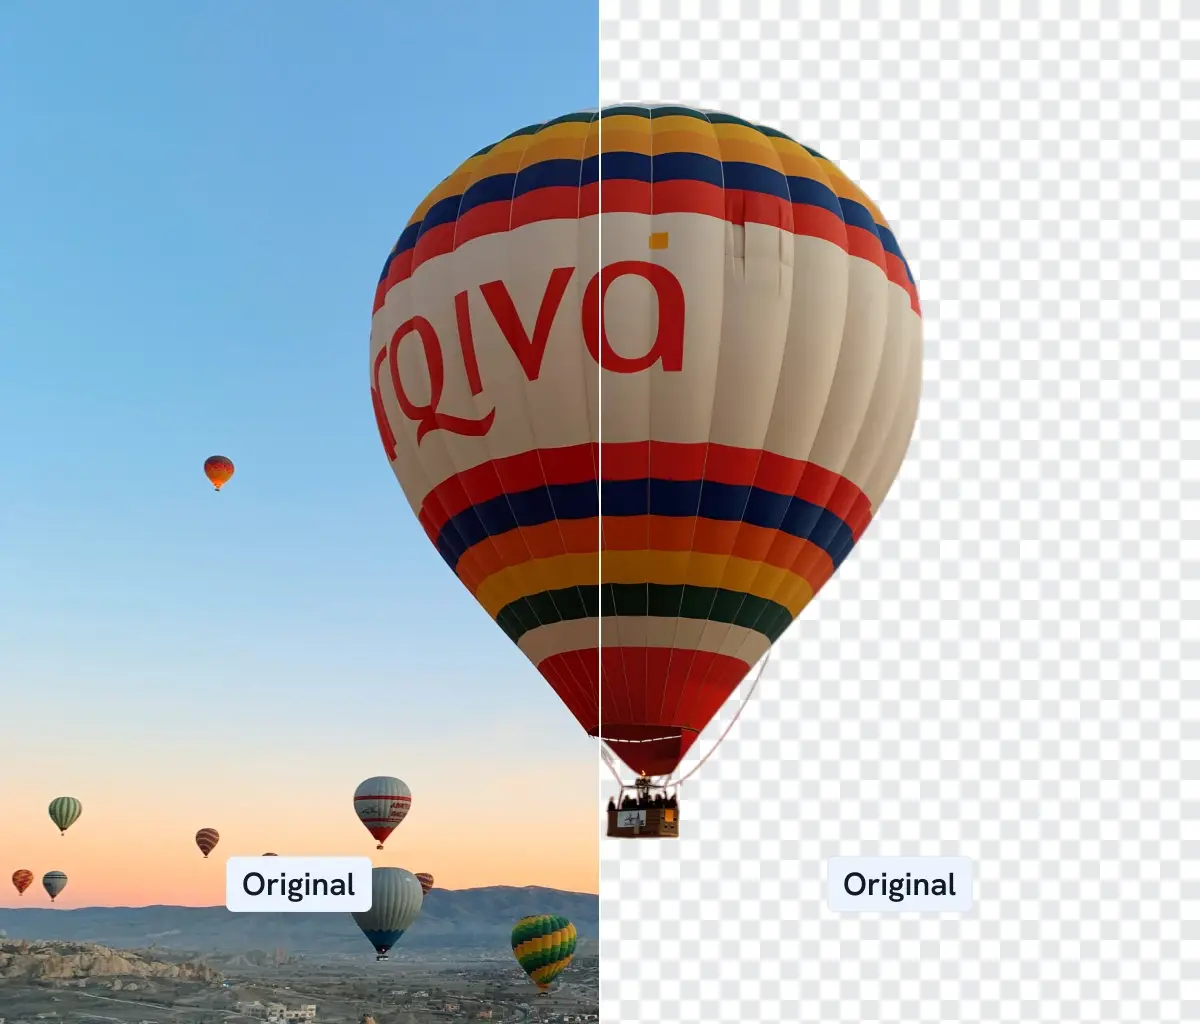 A travel photograph featuring a hot air balloon that has been edited and had its background removed.